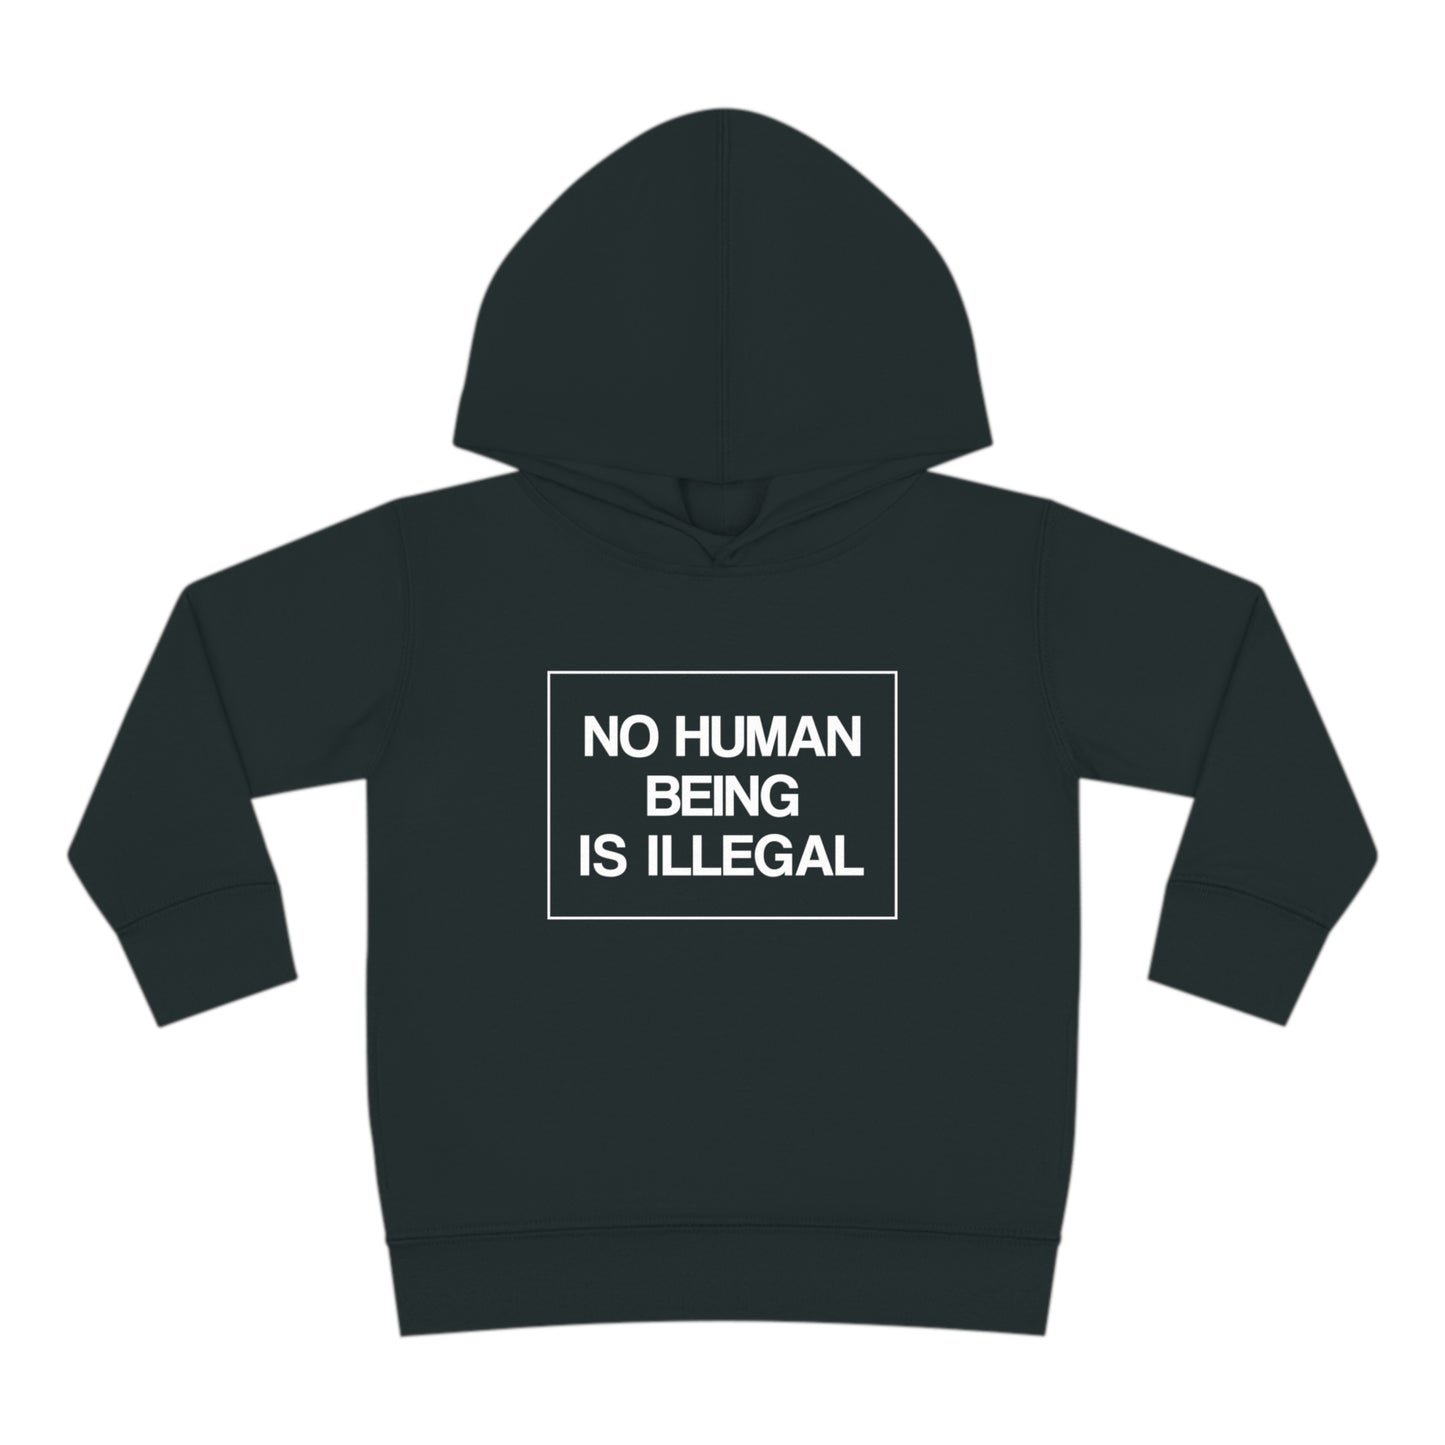 “No Human Being is Illegal” Toddler Hoodie